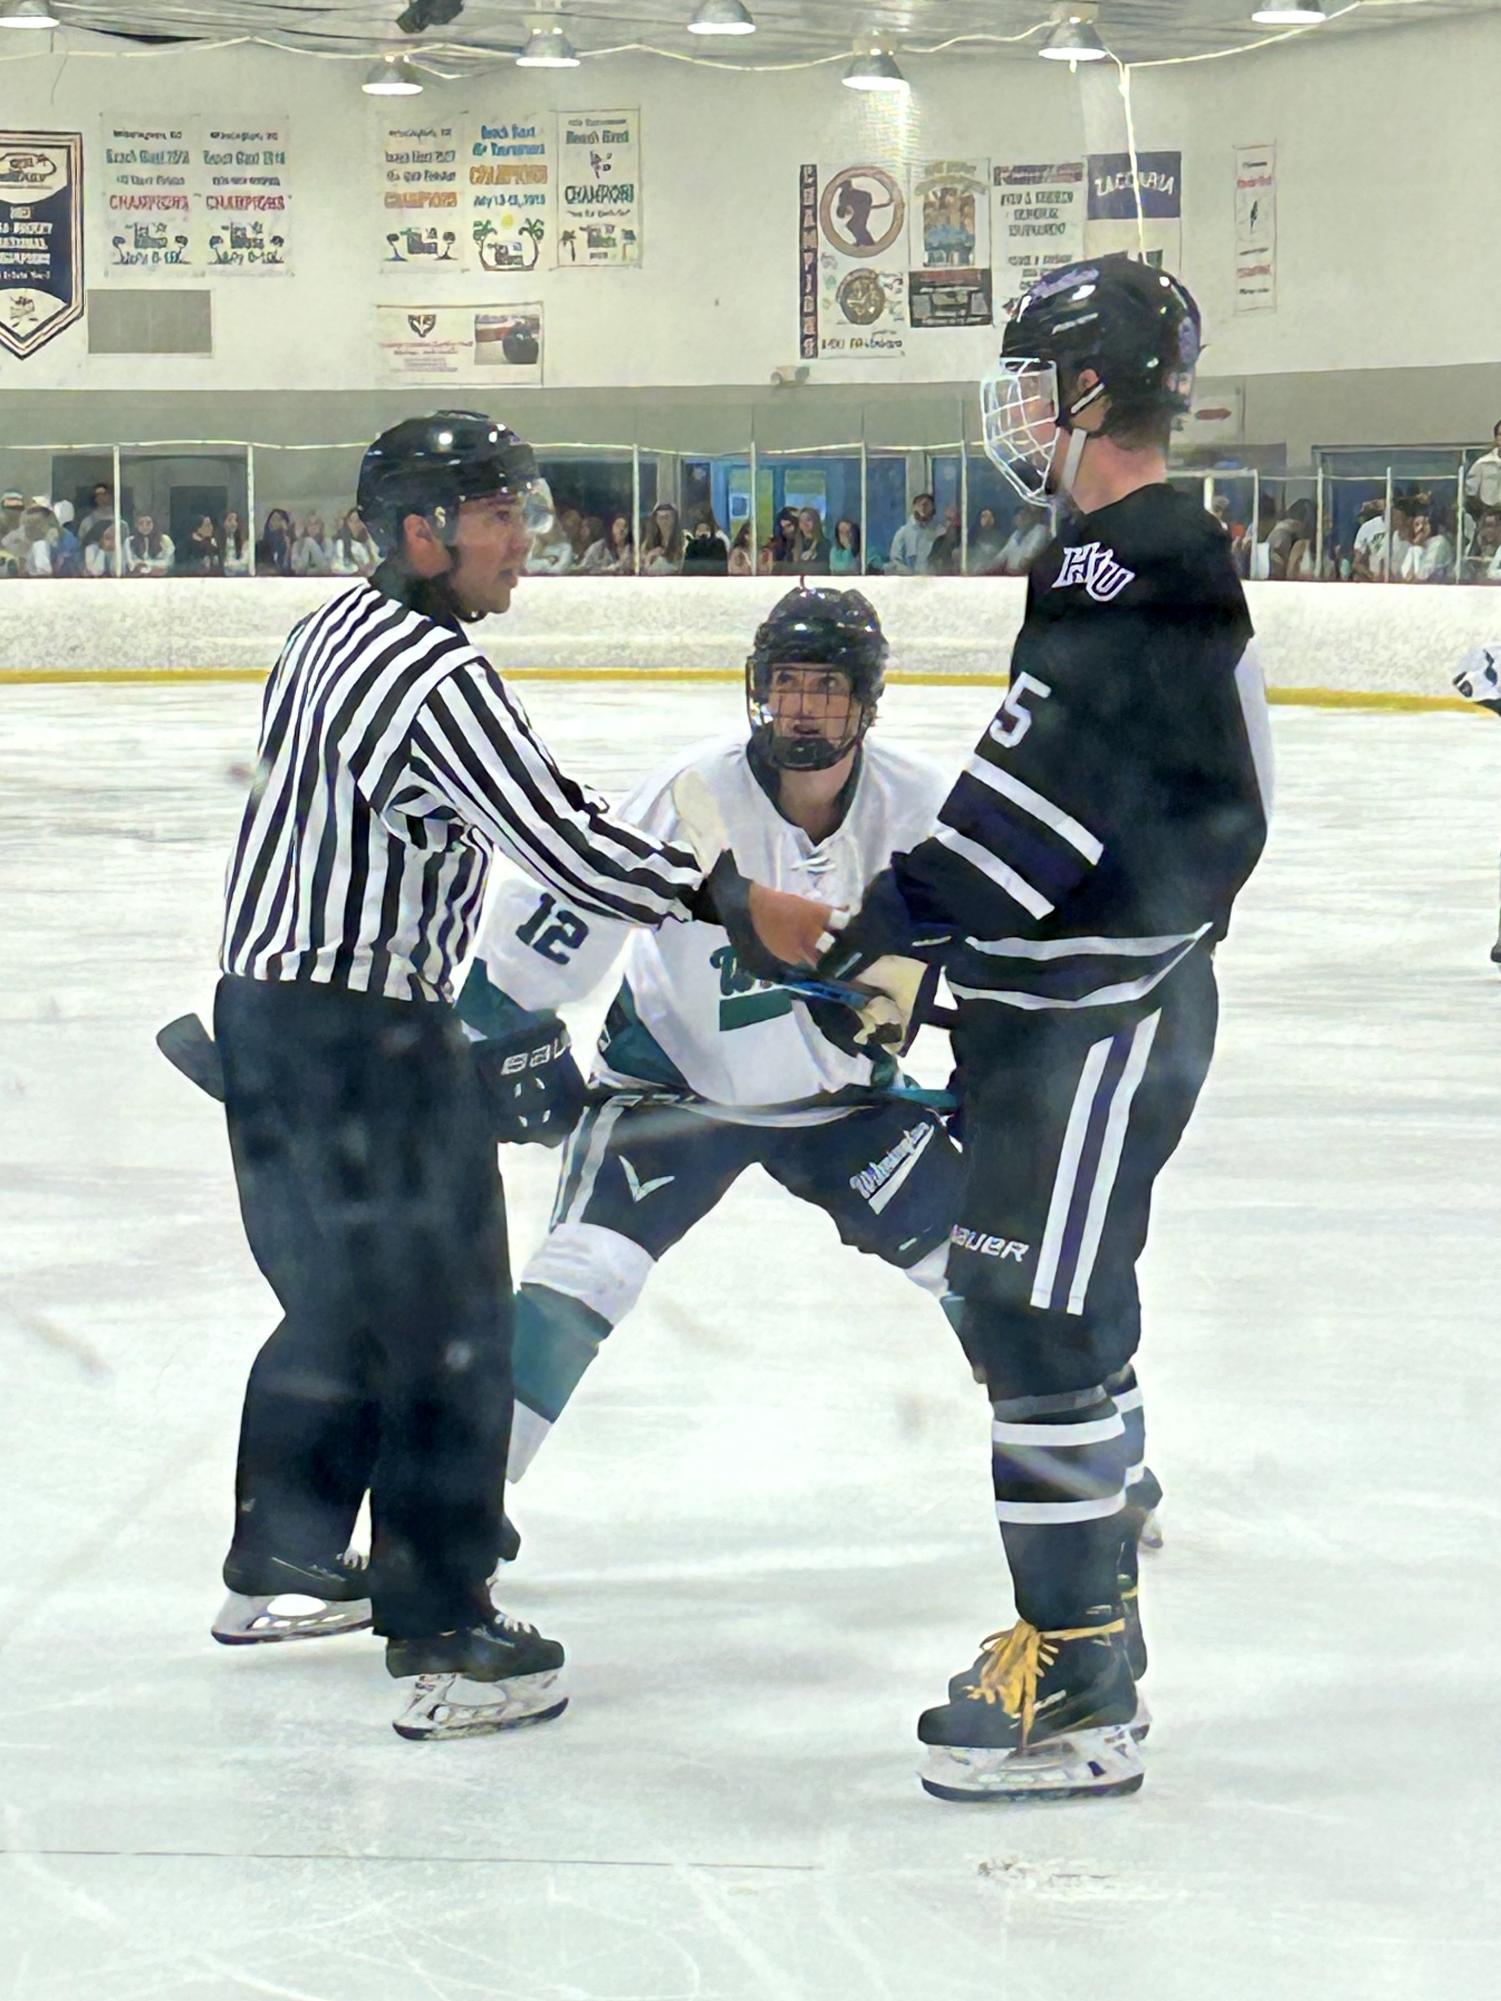 The UNCW Ice Hockey team kick off their first game of the season. 